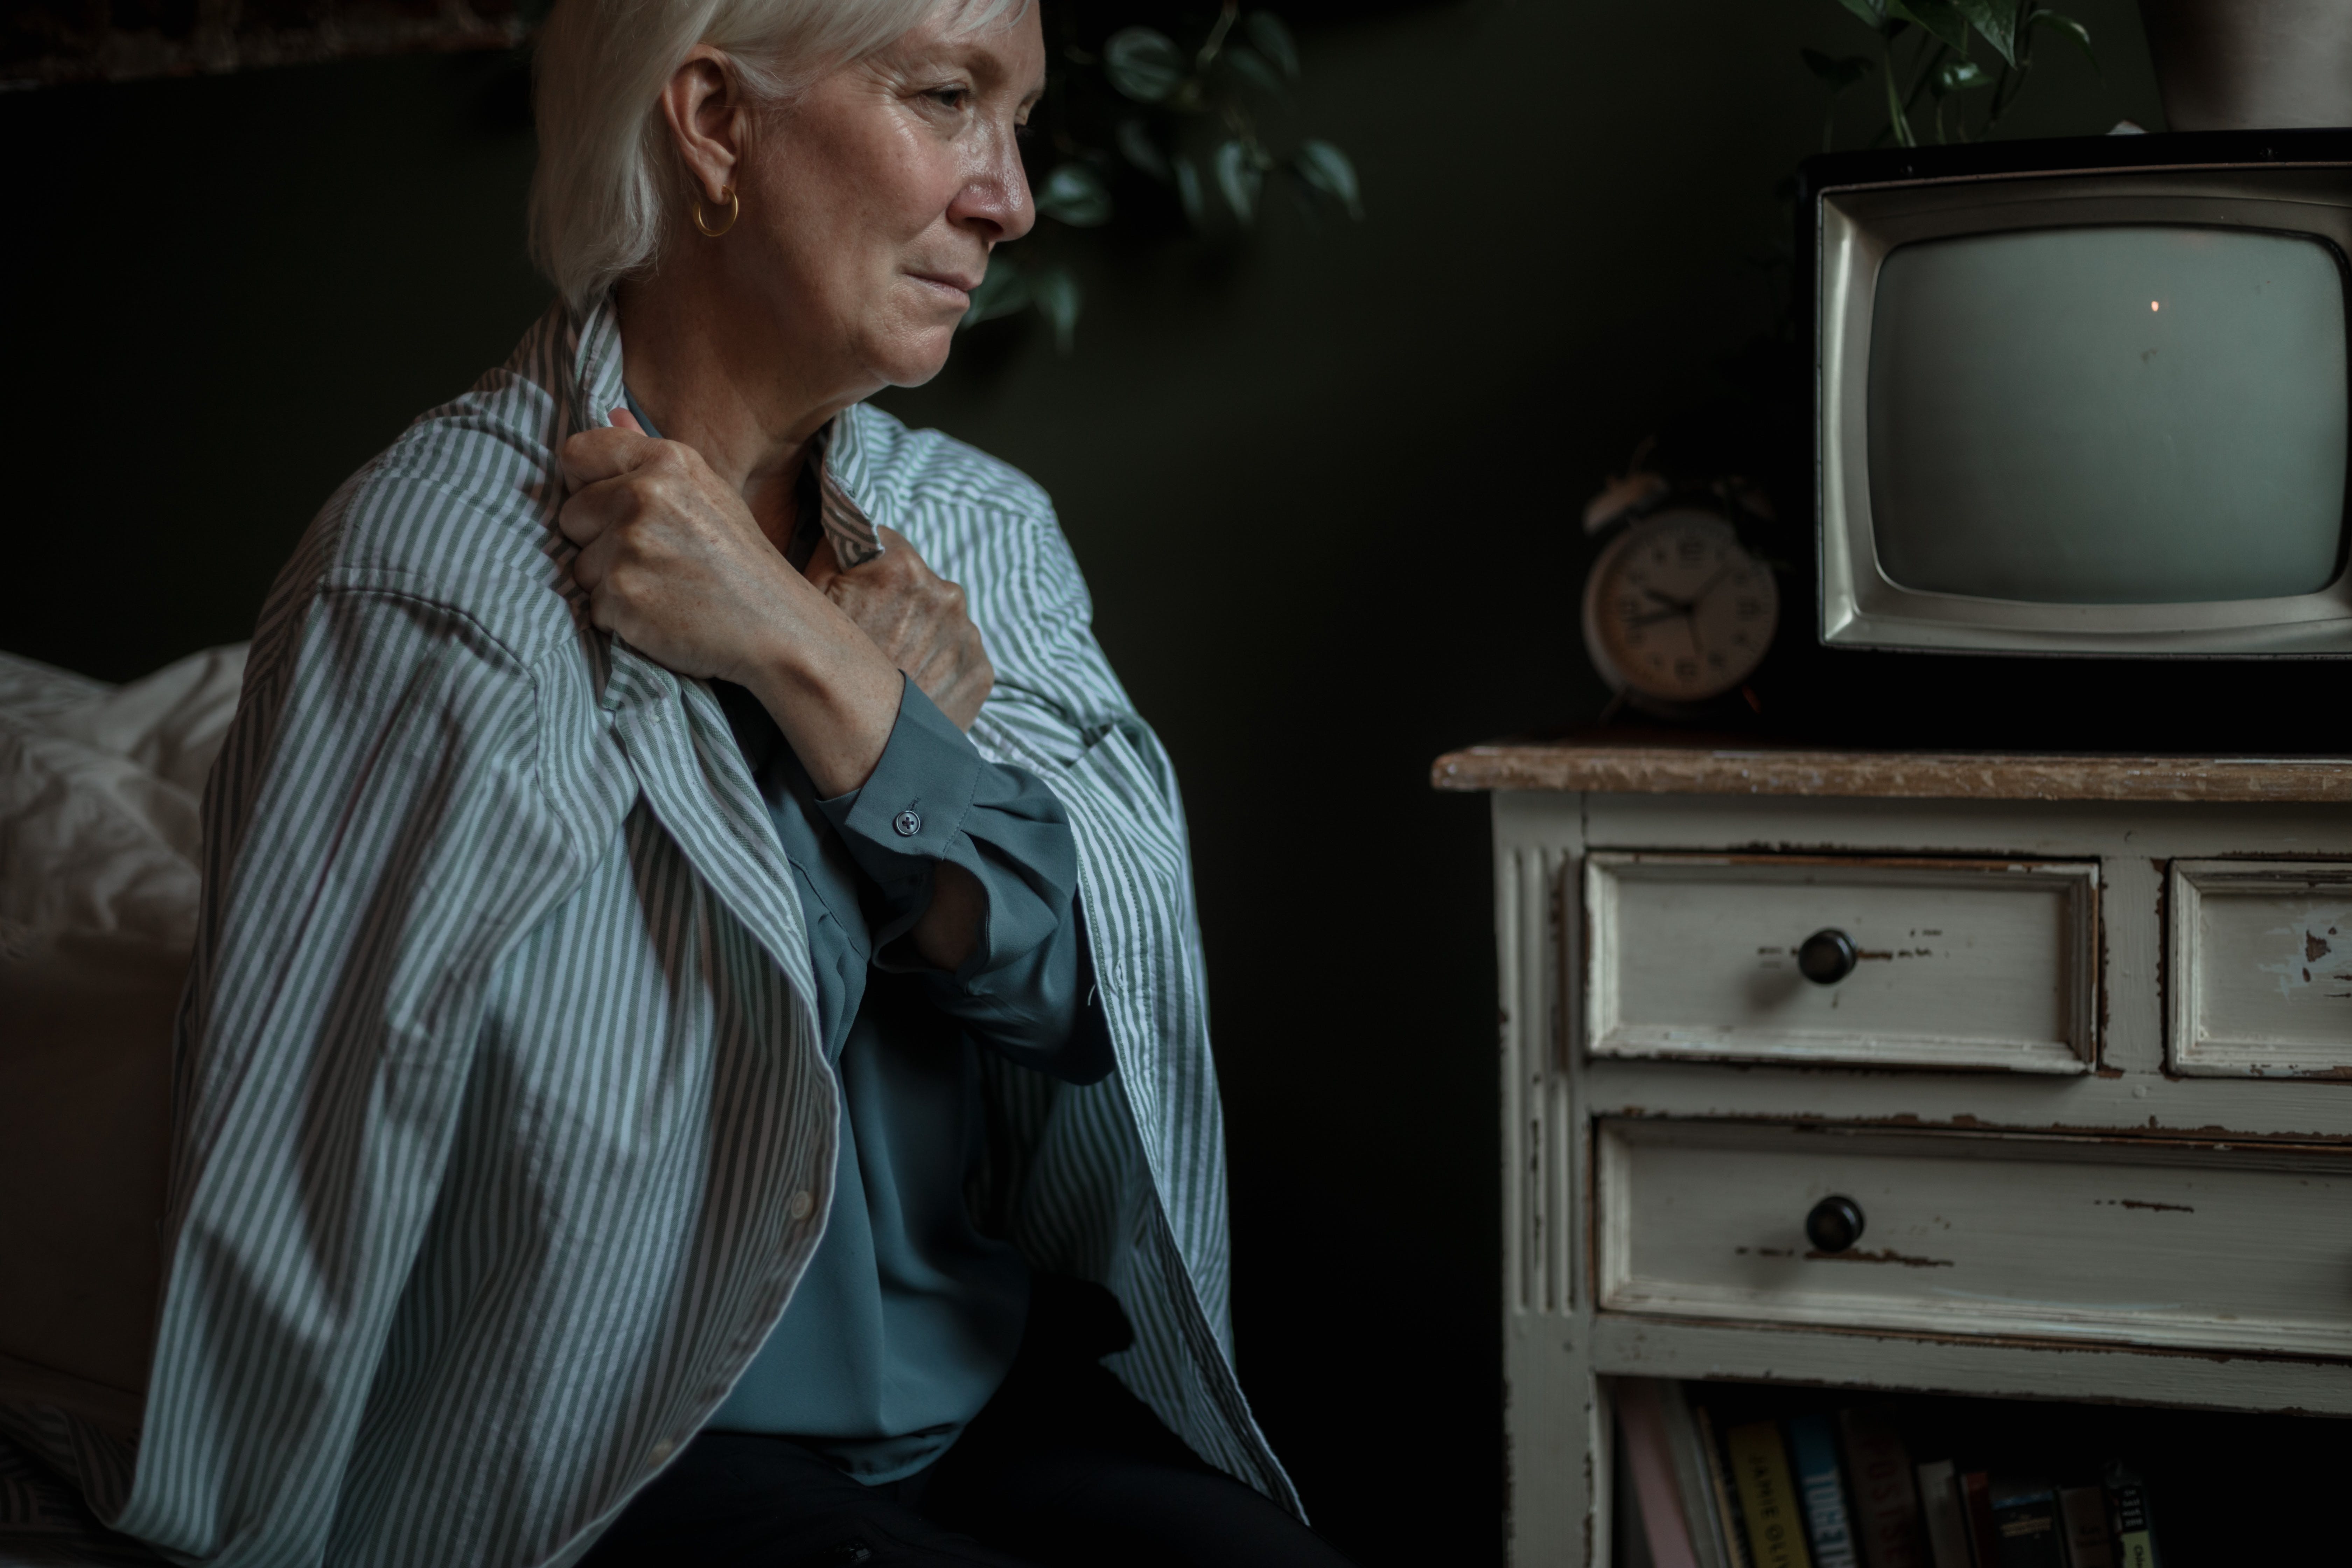 An elderly woman feeling unhappy and alone. | Source: Pexels